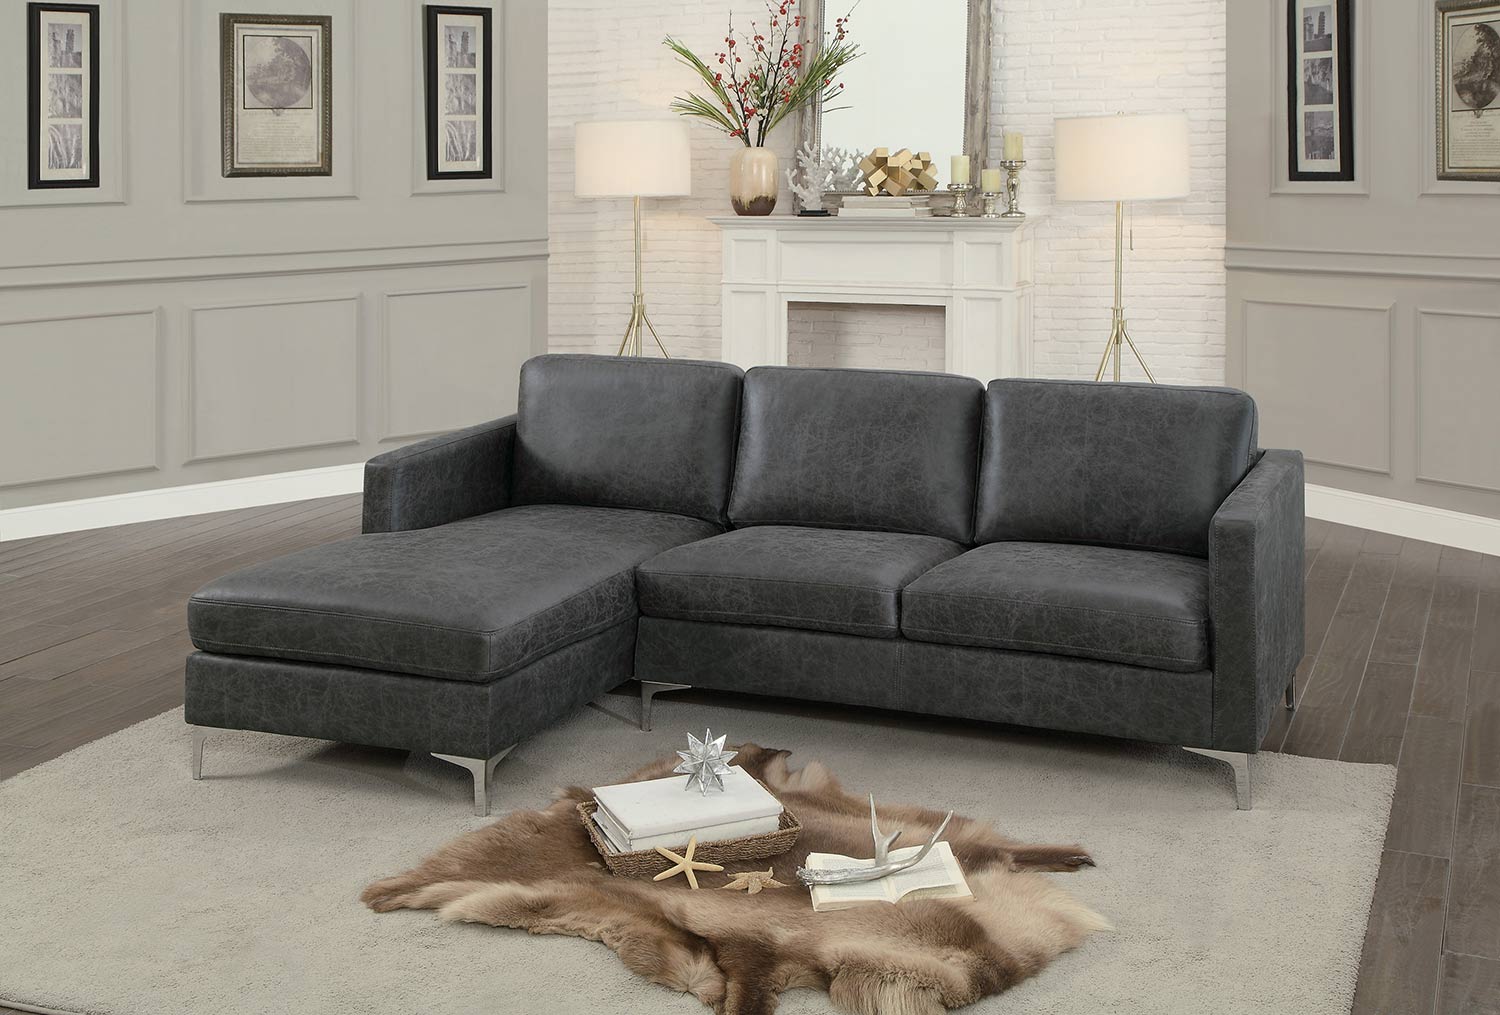 Homelegance Breaux Sectional Sofa - Gray Fabric